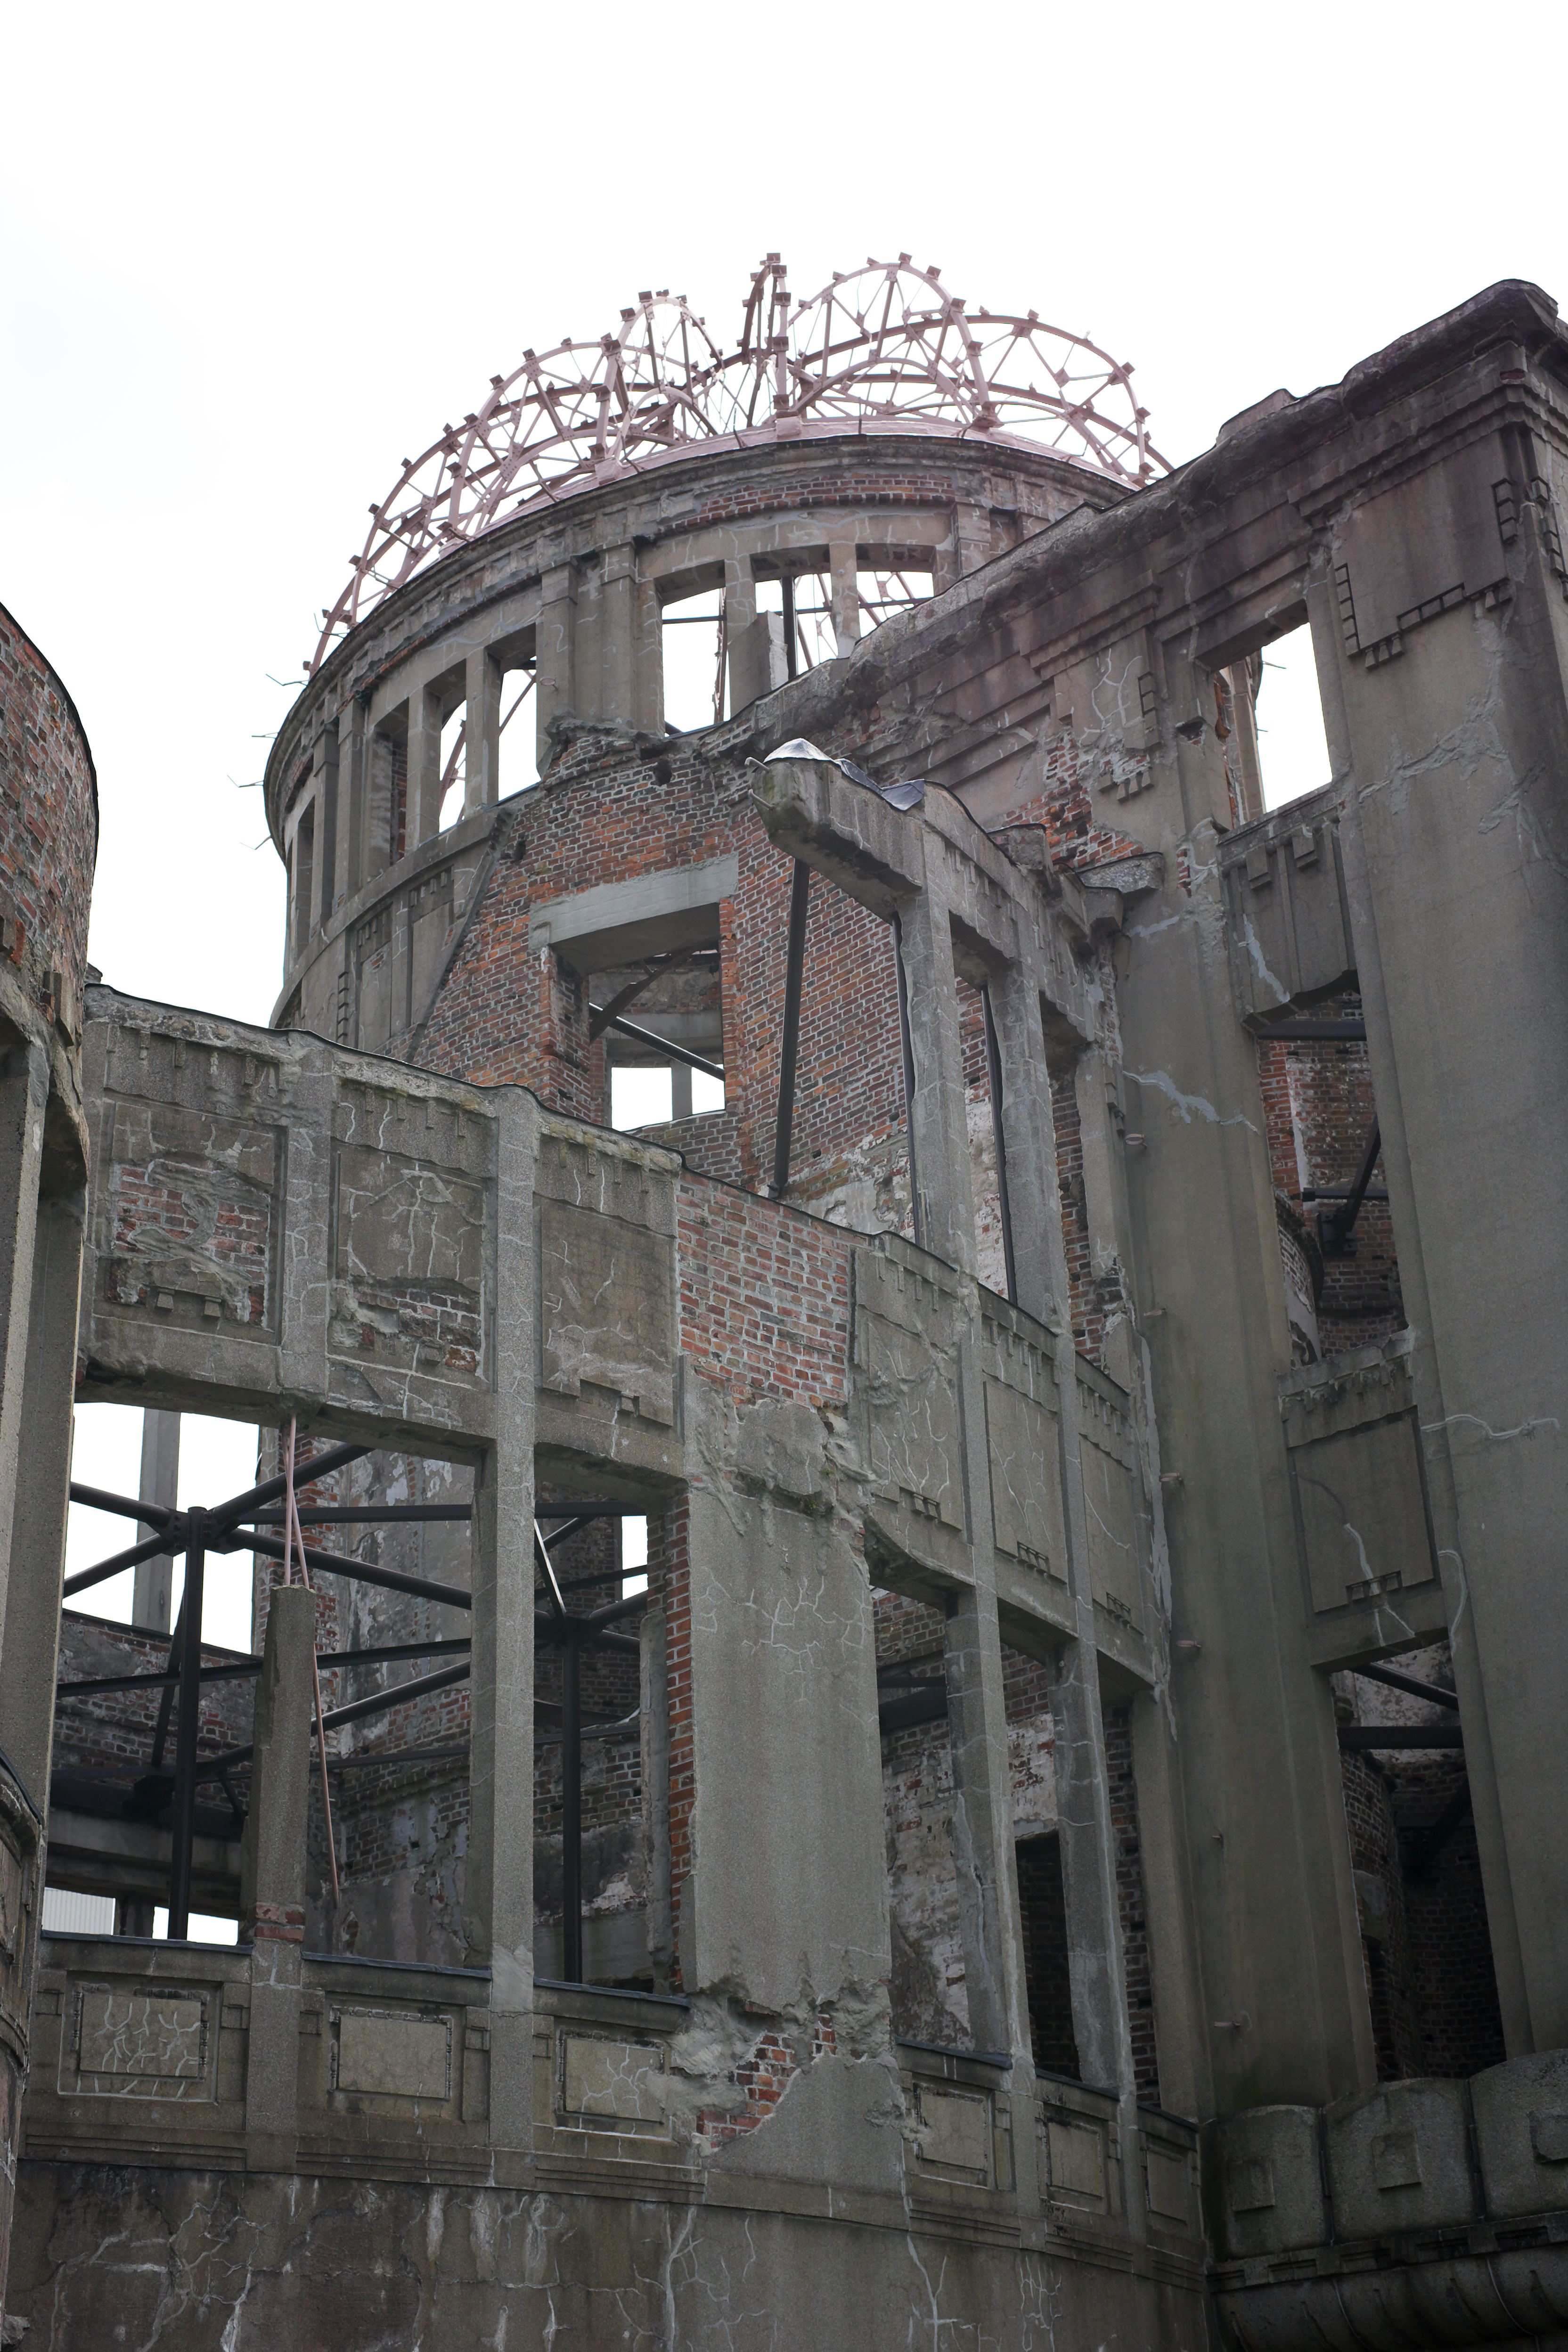 photo,material,free,landscape,picture,stock photo,Creative Commons,The A-Bomb Dome, World's cultural heritage, nuclear weapon, War, Misery